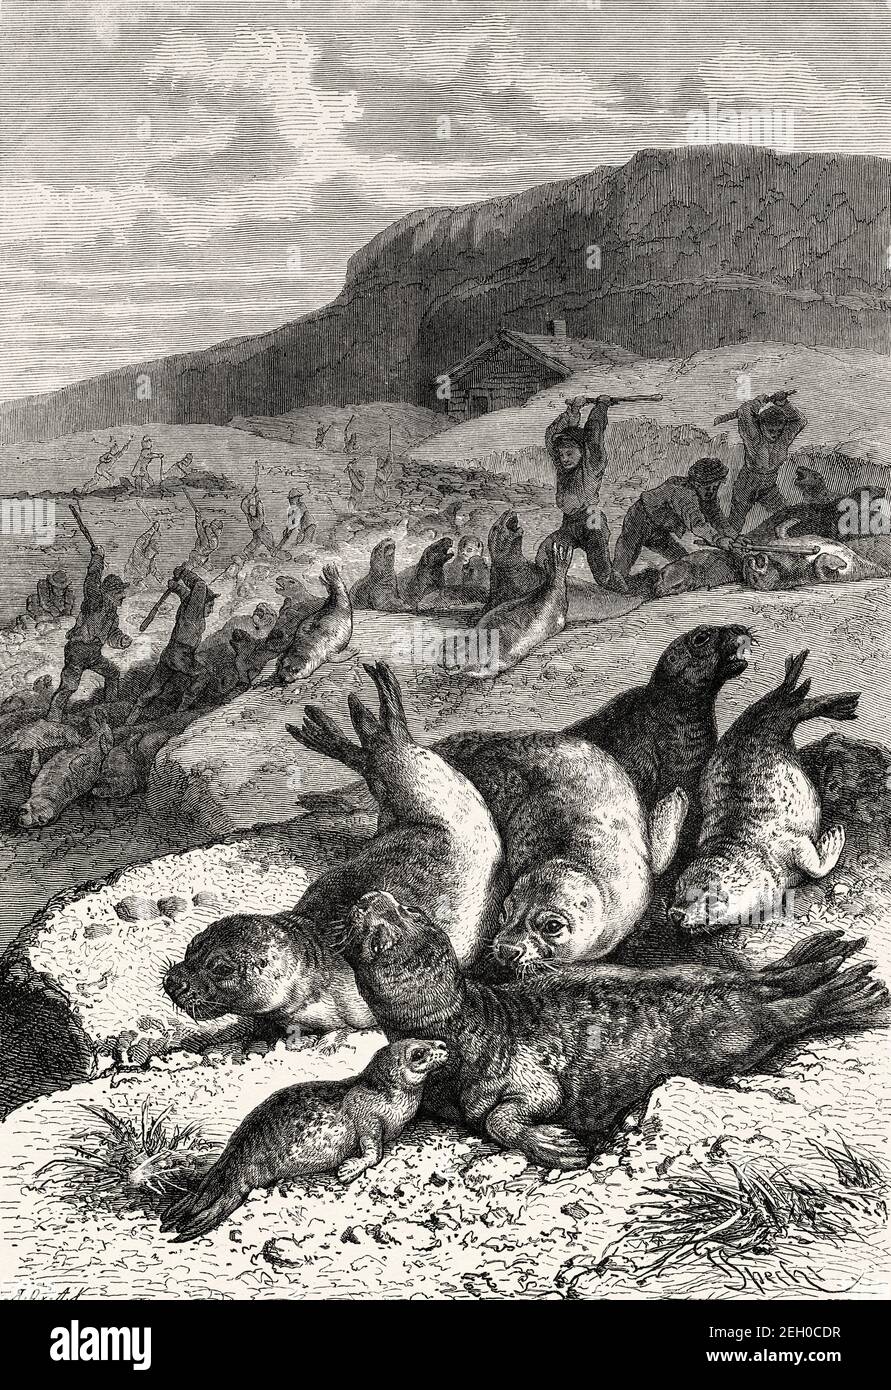 Massive seal hunt by Europeans on a beach in the nineteenth century, Europe. Old 19th century engraved illustration from El Mundo Ilustrado 1879 Stock Photo